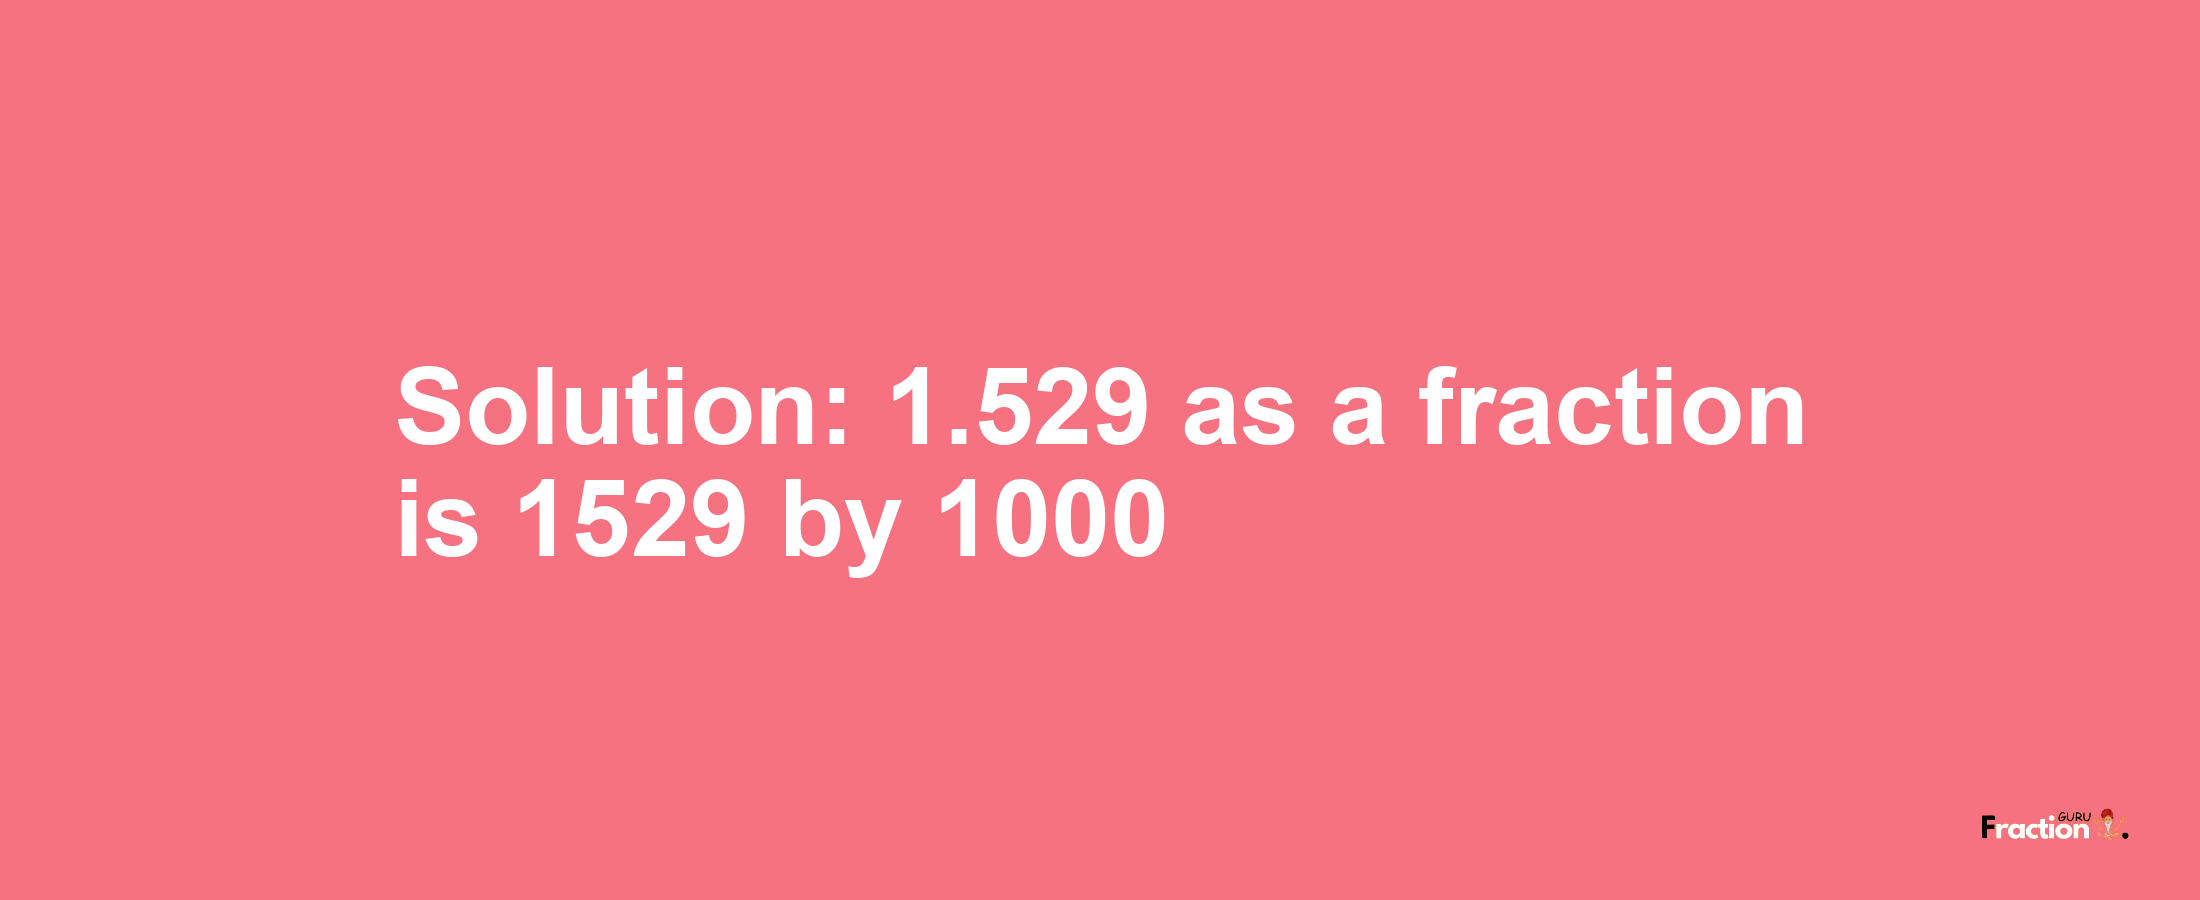 Solution:1.529 as a fraction is 1529/1000